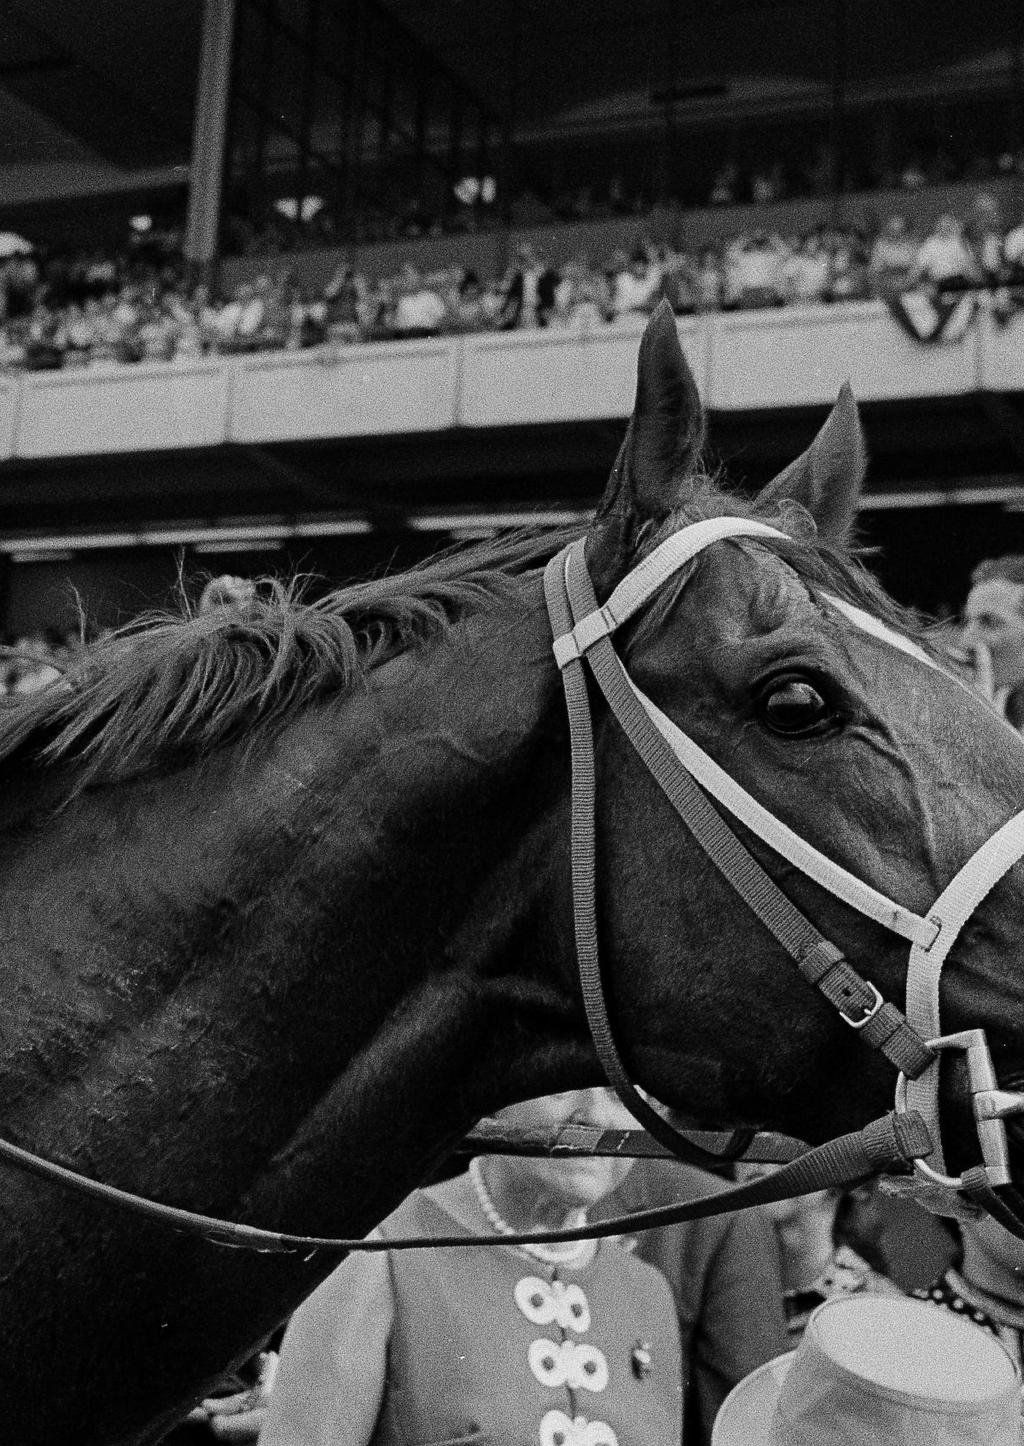 Nearly three decades earlier, on June 9, 1979, Coastal made his second start in 27 days a memorable one, as he defeated the fresh Spectacular Bid, who was making his second start in 35 days, in the